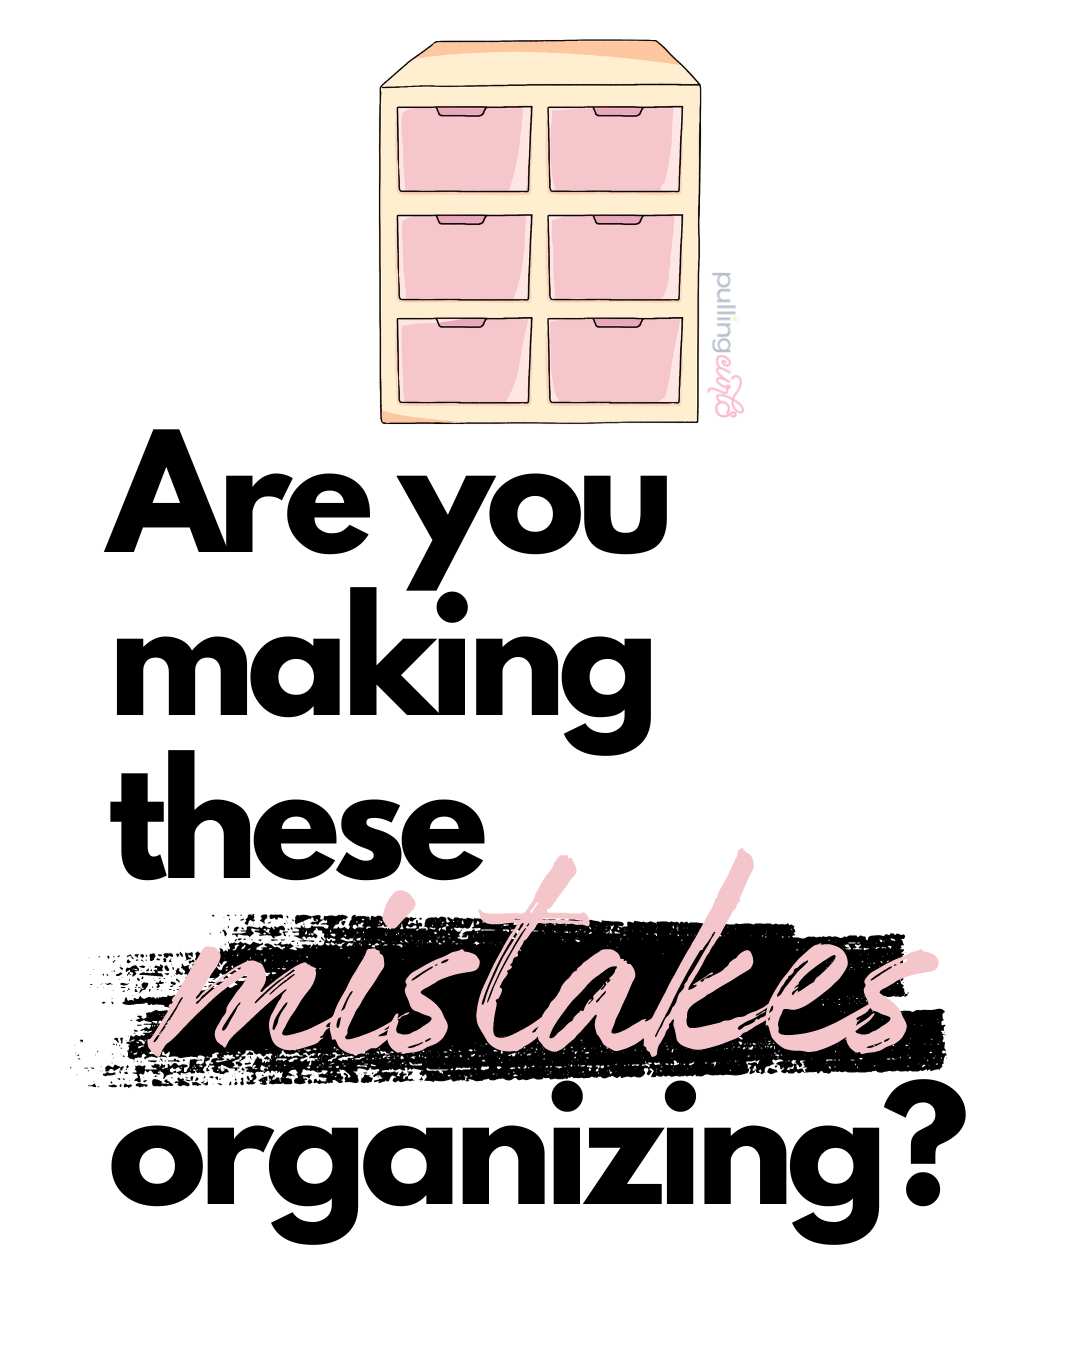 Uncover the biggest trick that will revolutionize your organization process – pulling everything out! Get to know how clearing out an area makes cleaning, decluttering, and organizing more streamlined. It may seem counterintuitive, but trust us, this secret ingredient will save you from the chaos! via @pullingcurls